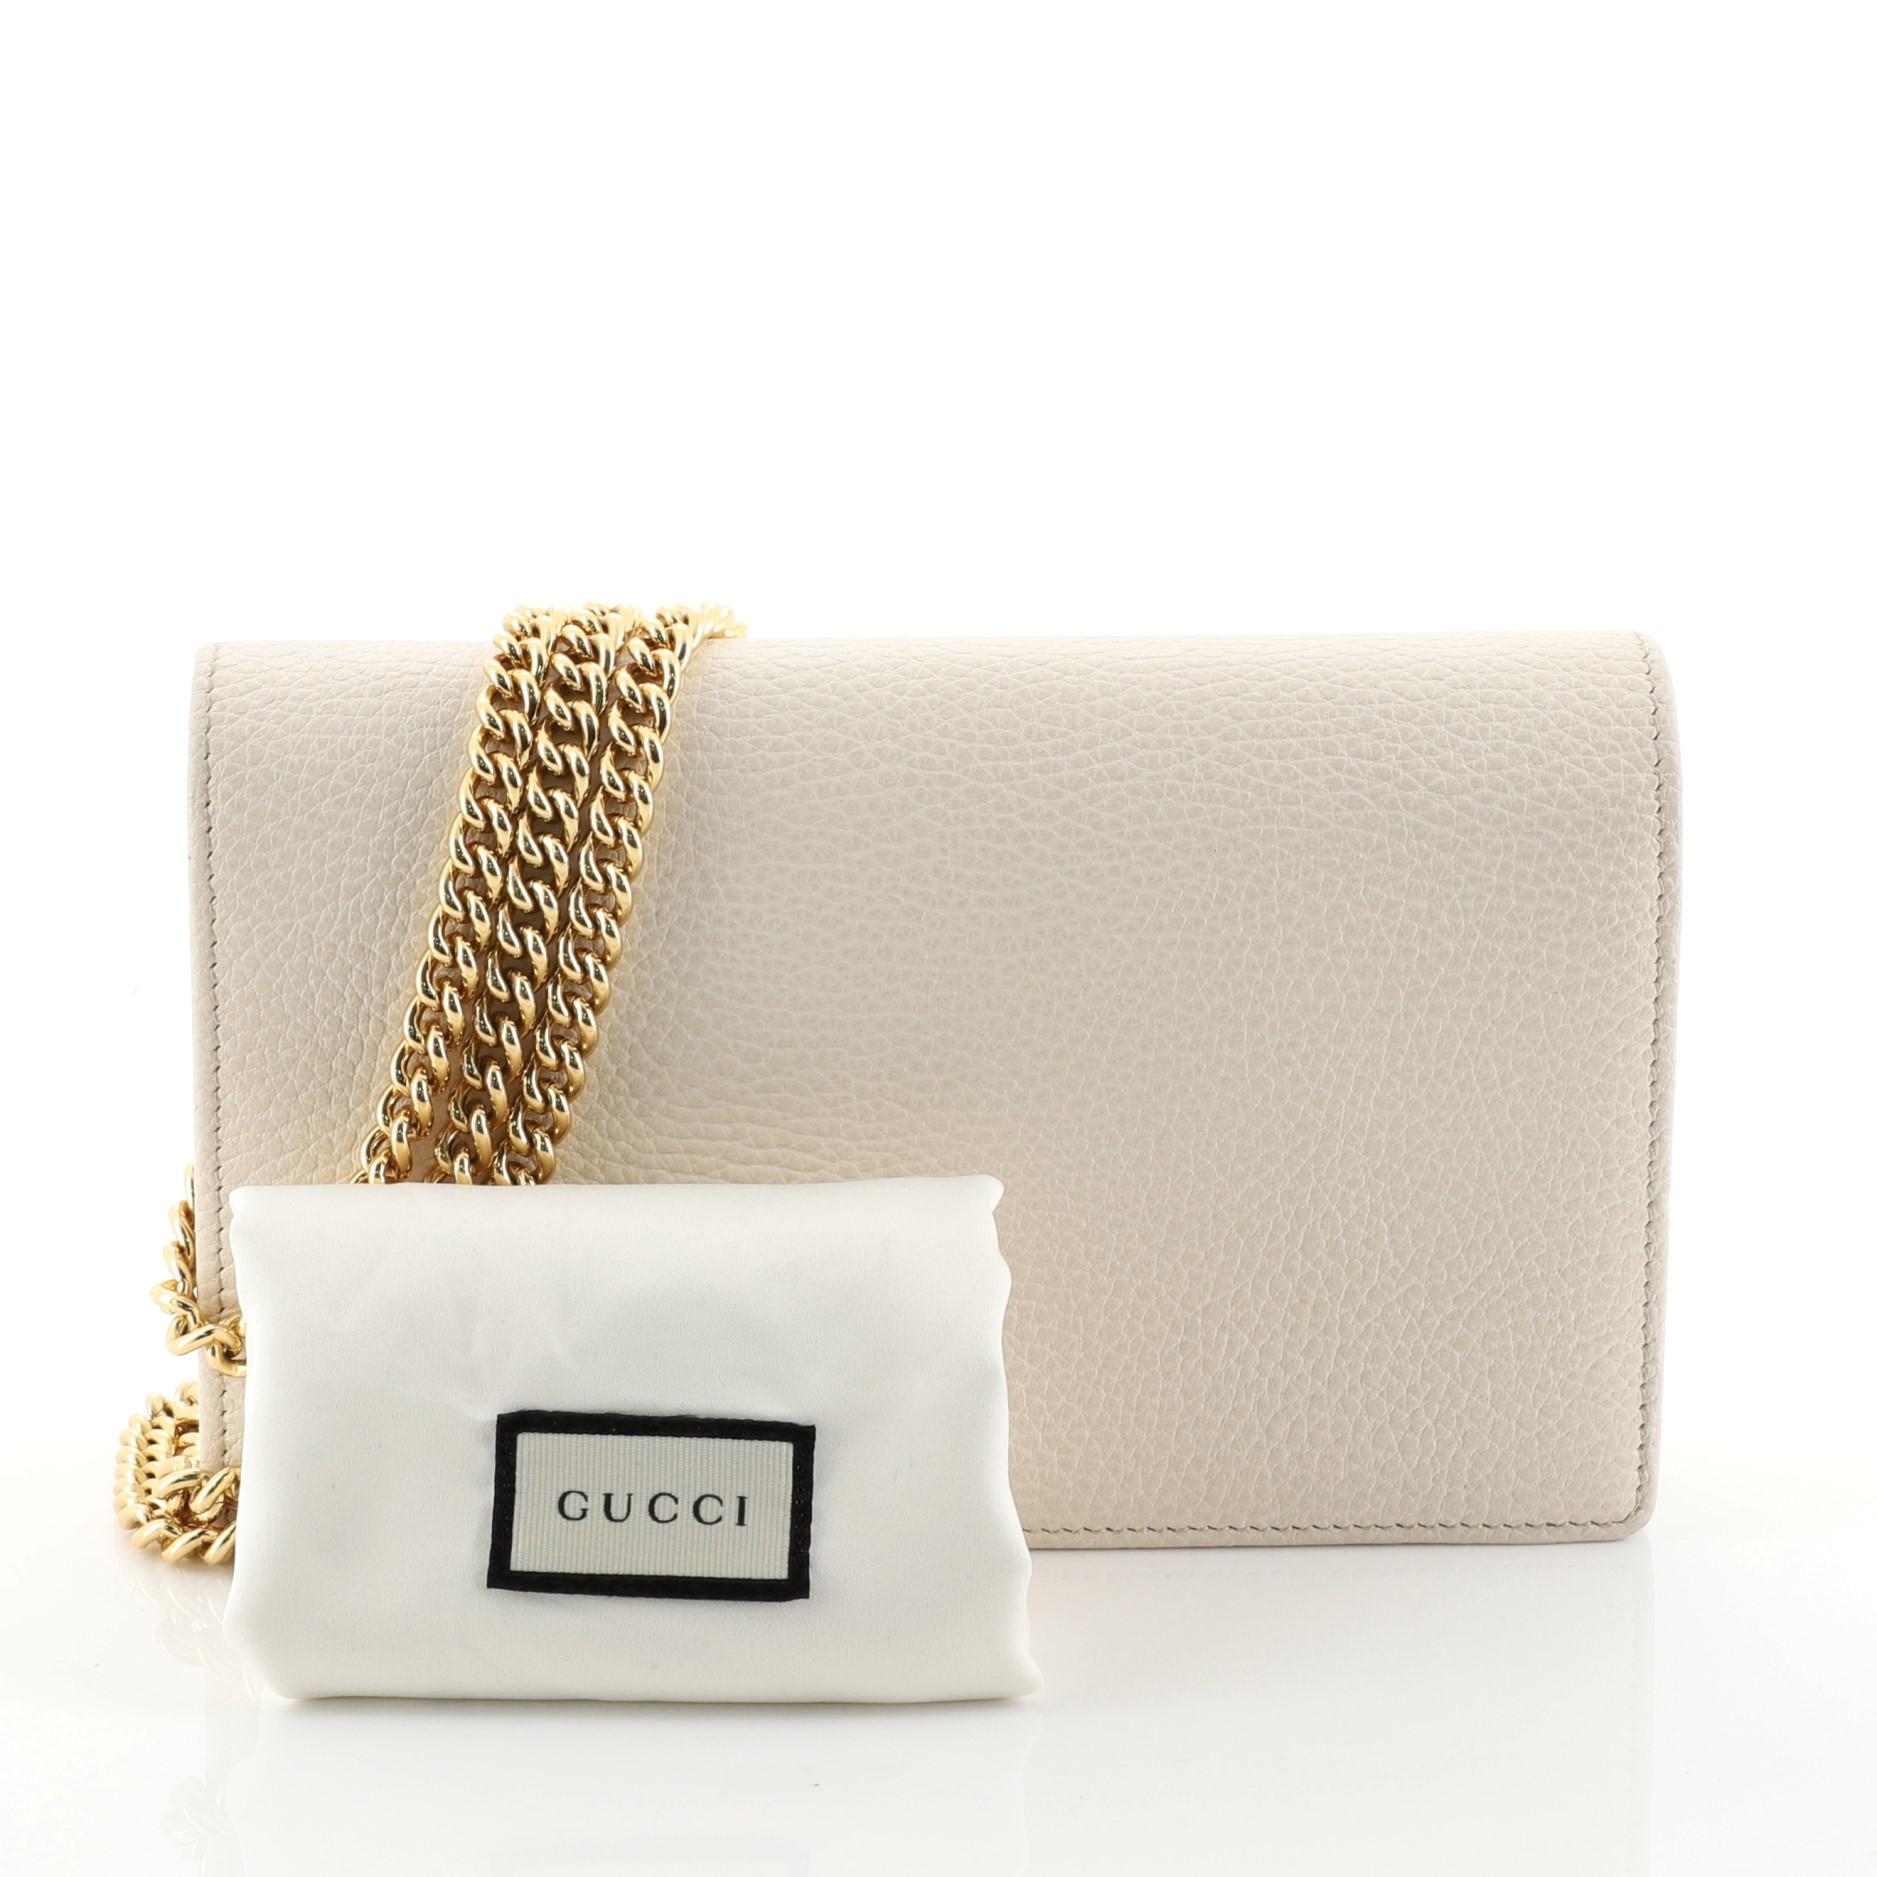 This Gucci Petite GG Marmont Chain Wallet Leather Mini, crafted from white leather, features chain link strap, double G logo at front flap, and gold-tone hardware. Its snap button closure opens to a black fabric and white leather interior with